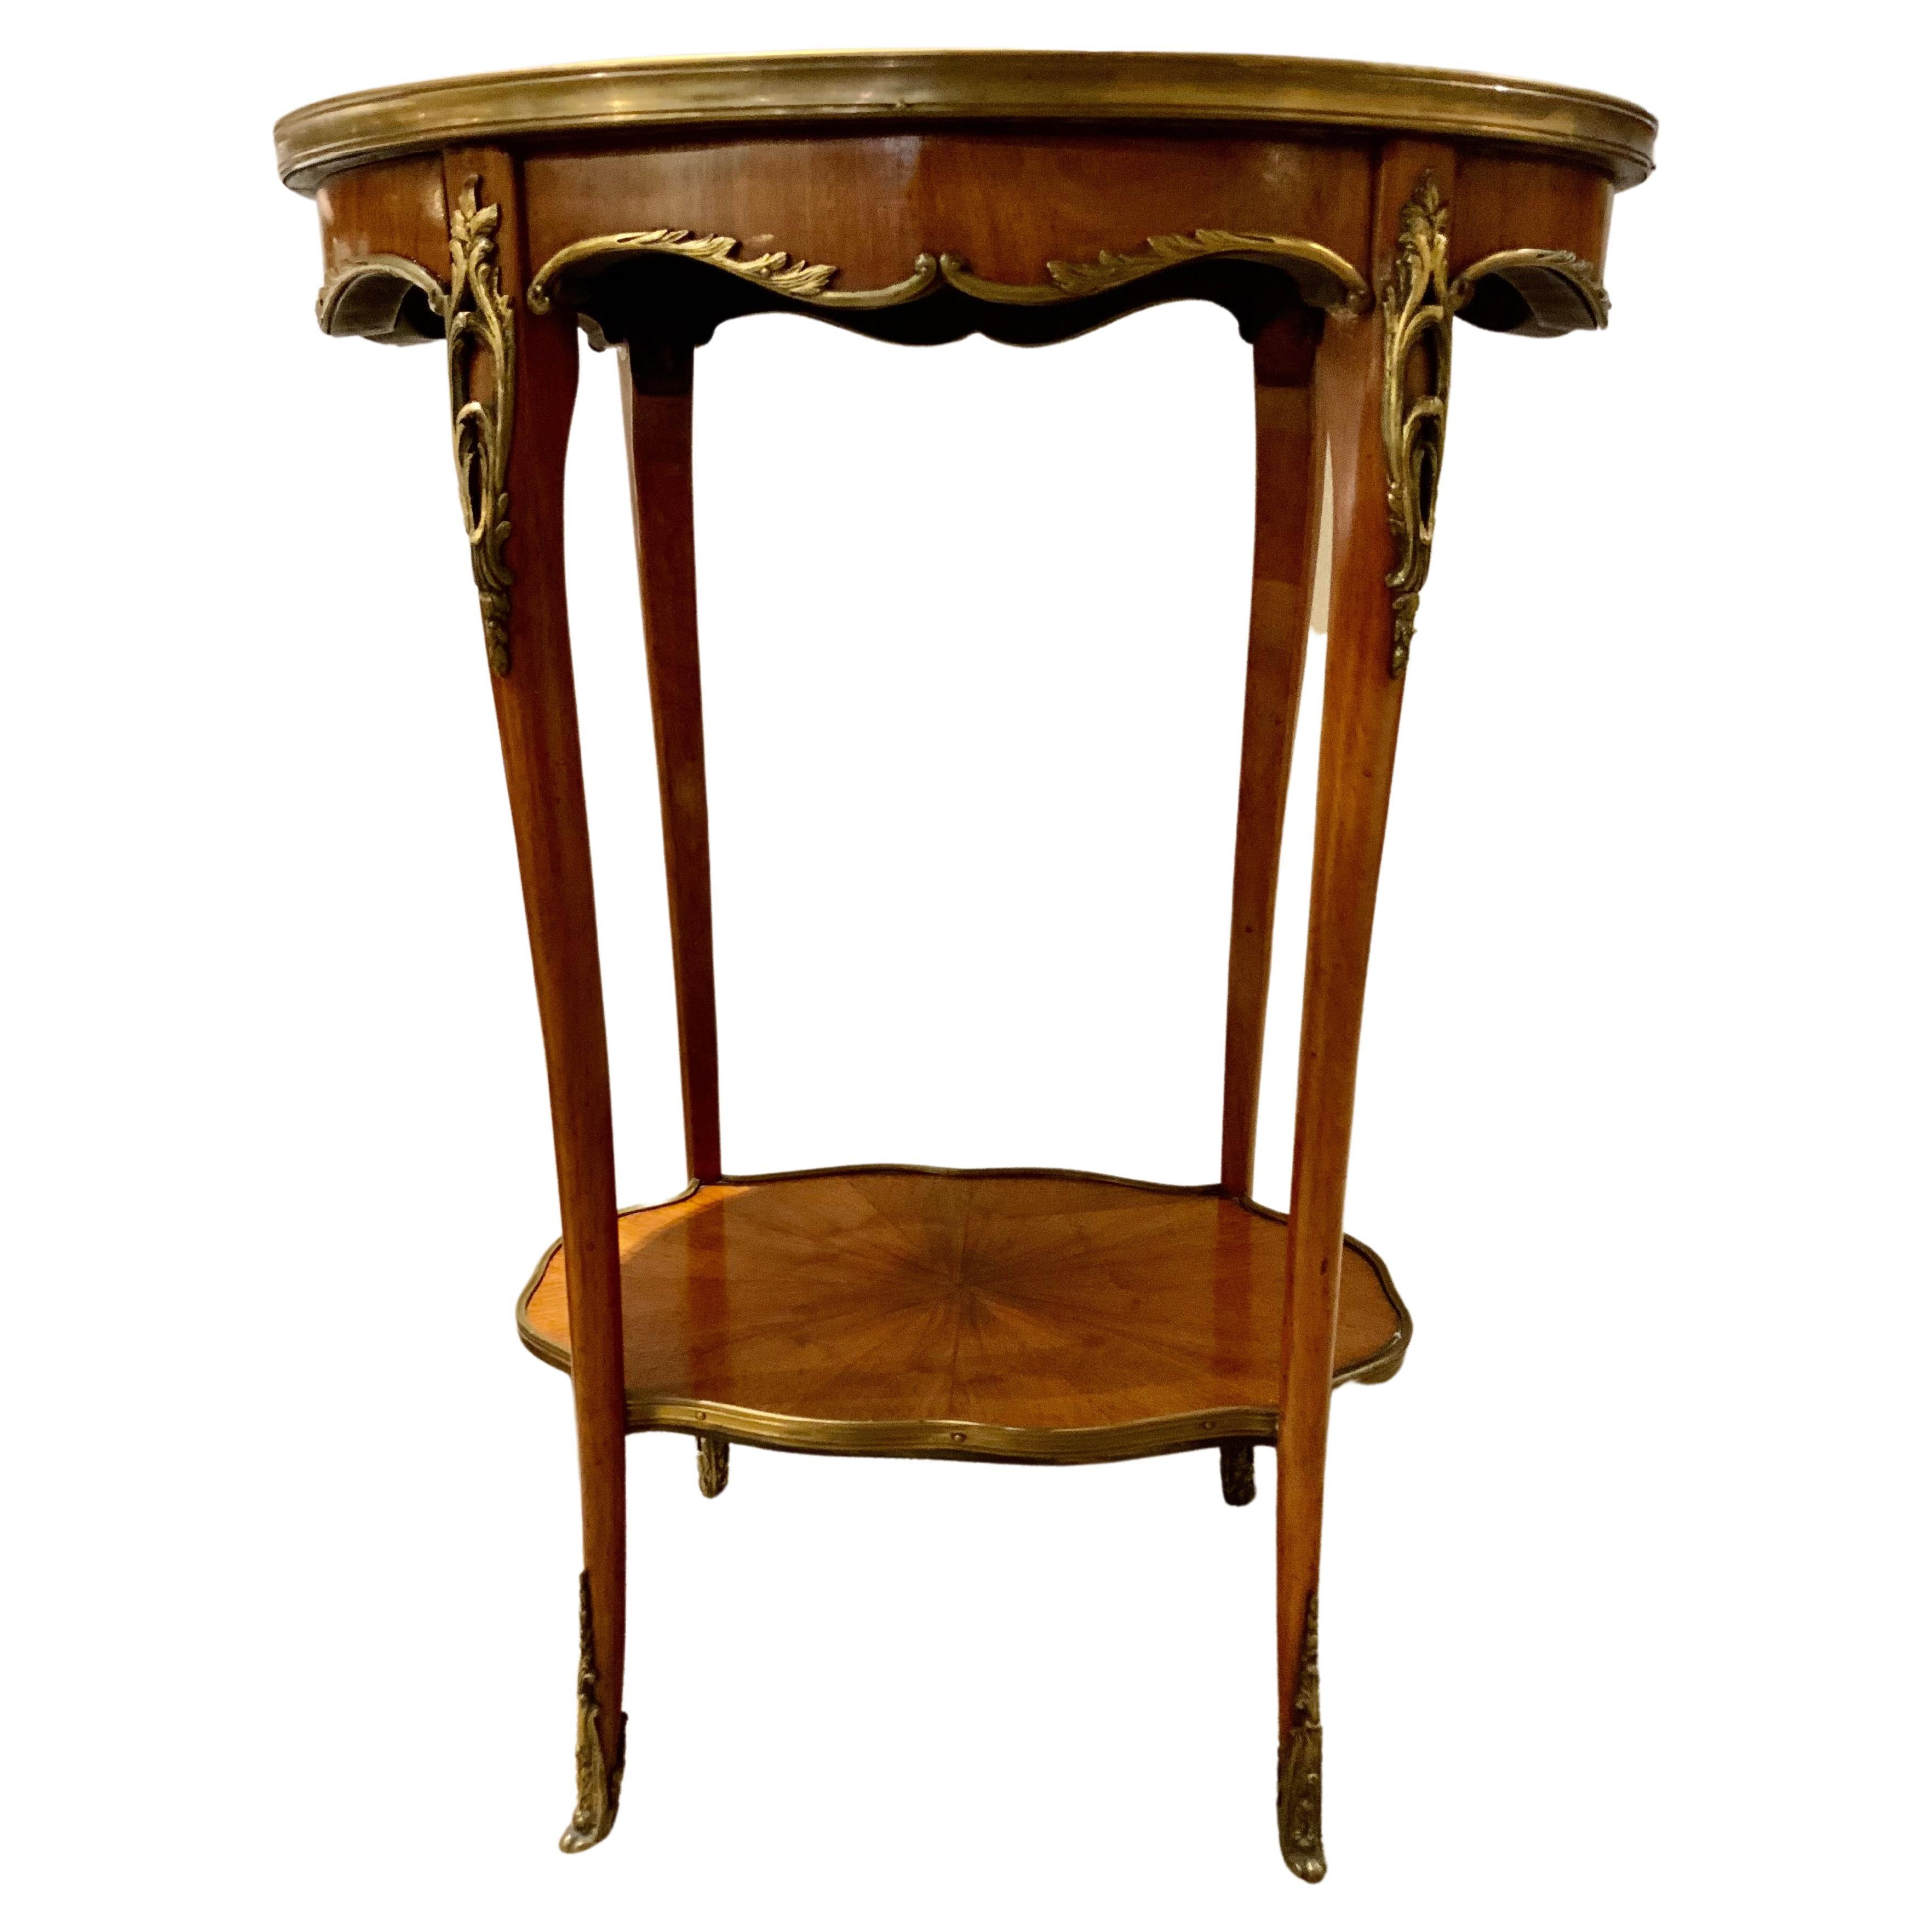 French 19 Th Century Oval Shaped Side Table with Ormolu Banding and Designs For Sale